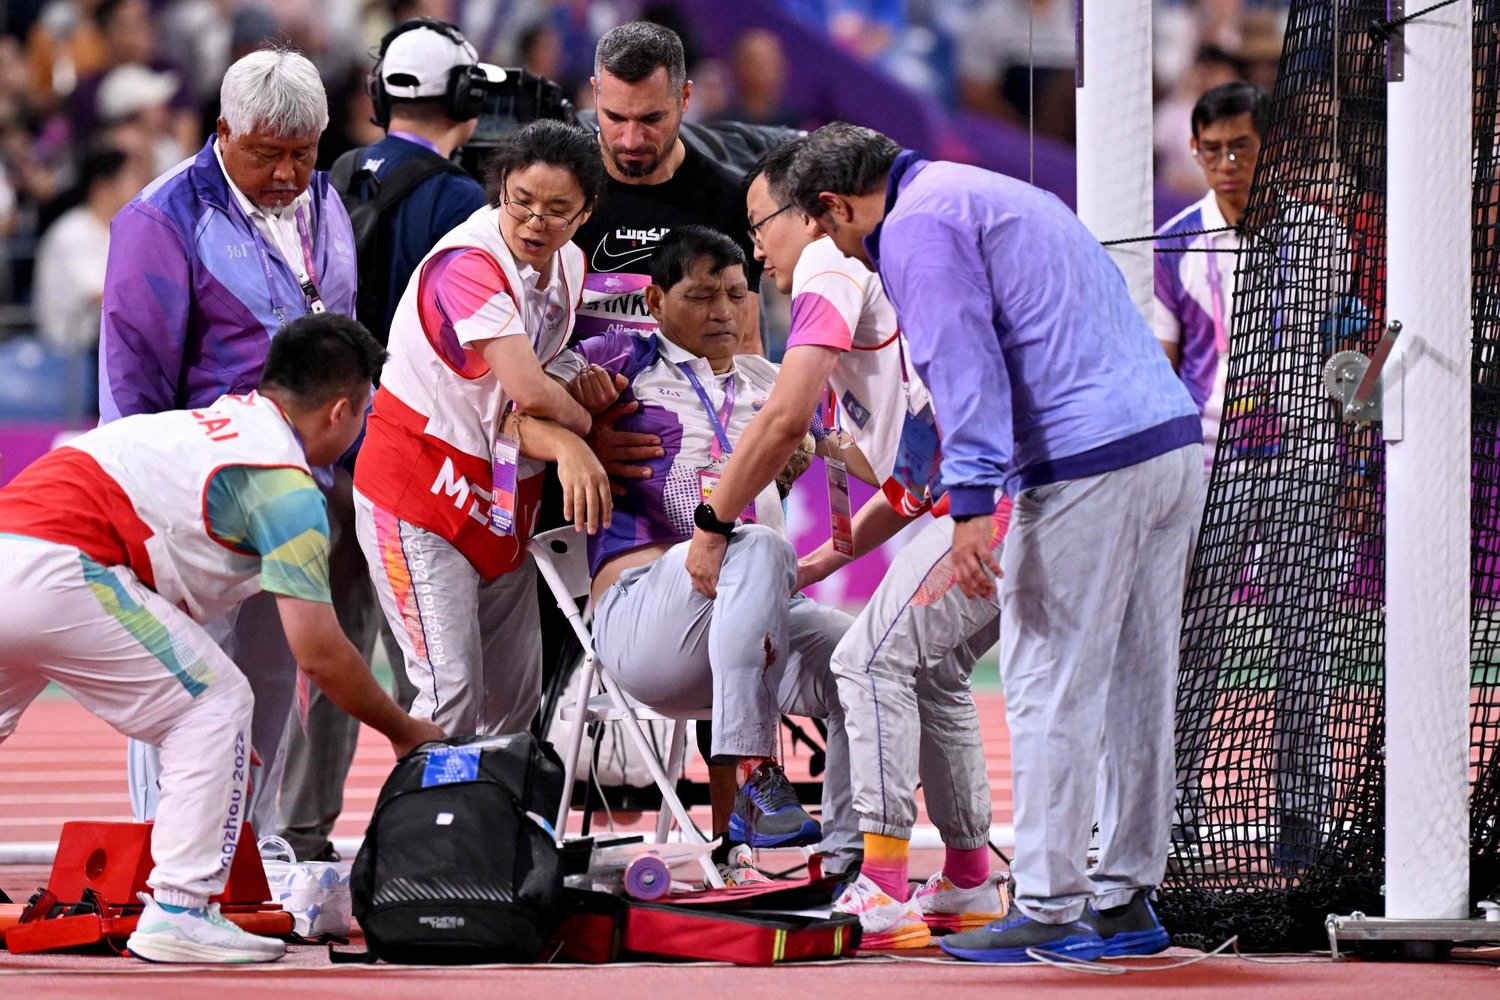 A Kuwaiti archer breaks a referee’s leg at the Asian Games